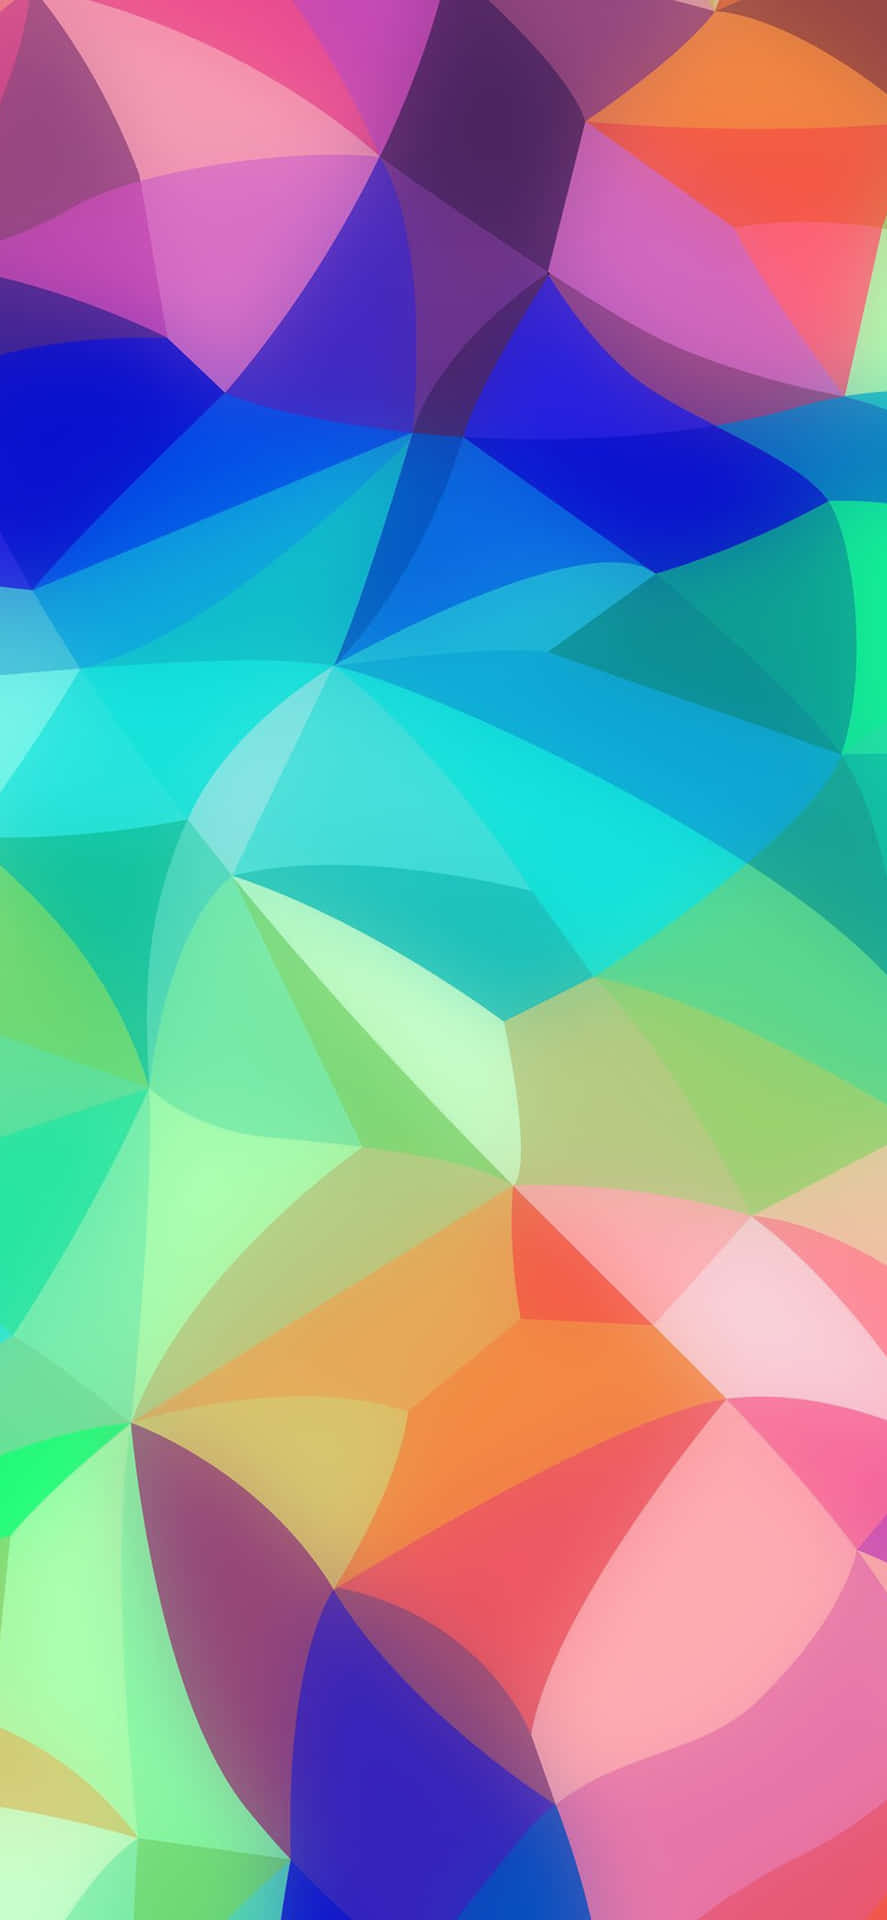 Brighten up your day with the new Pastel Rainbow IPhone Wallpaper